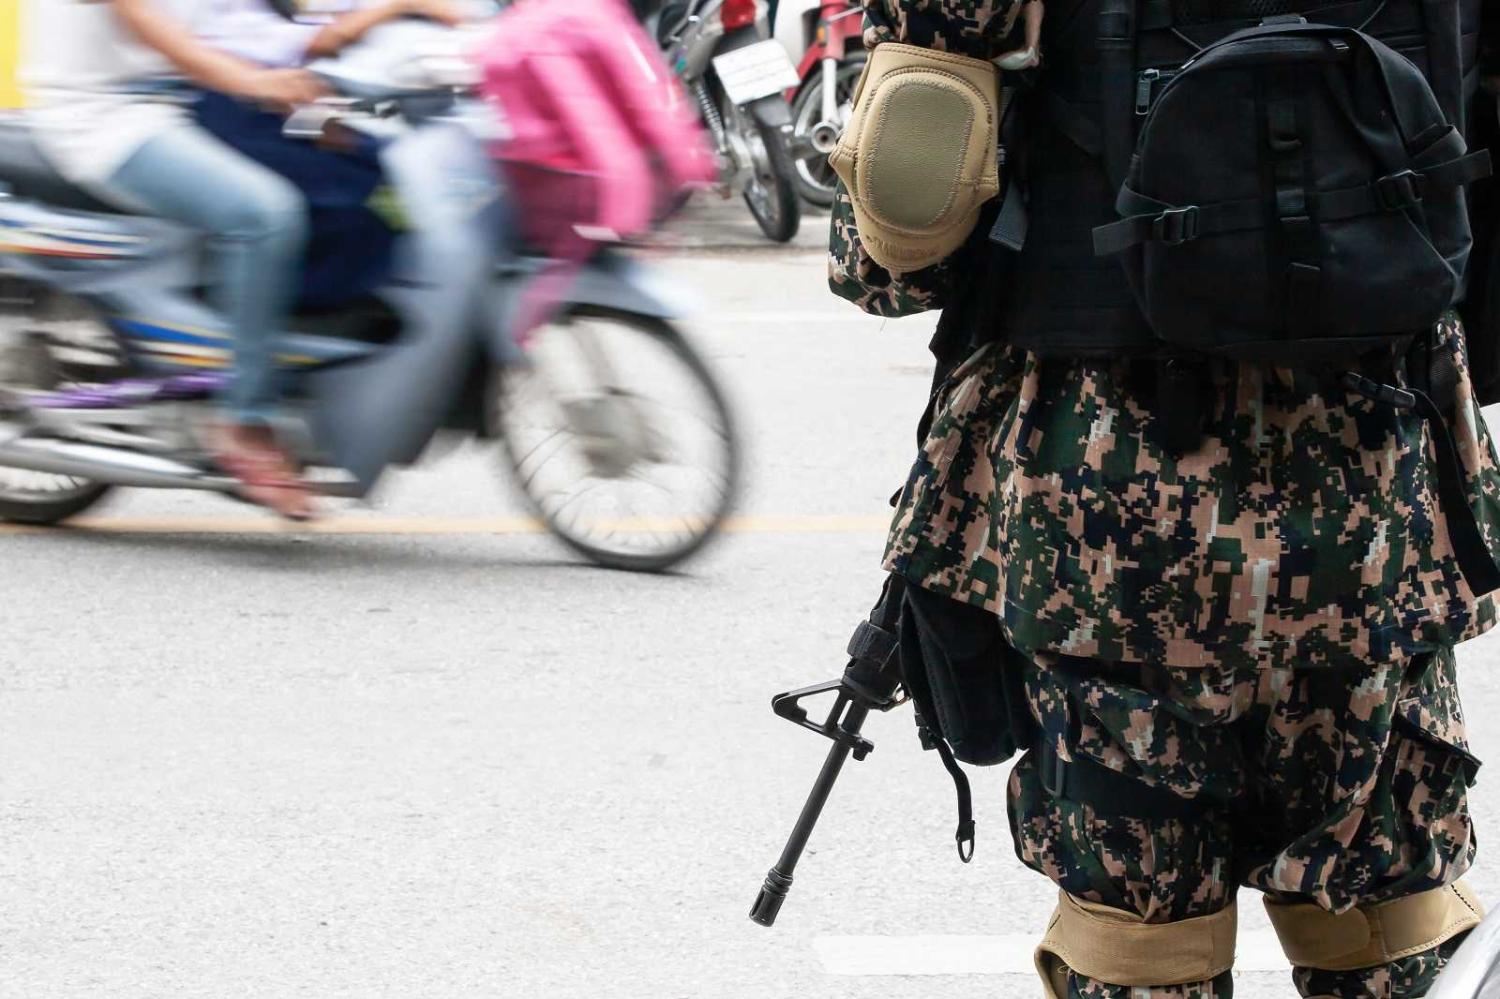 Royal Thai Army soldier on patrol near a local market at Narathiwat, during South Thailand's insurgency conflict (Tanes Ngamson/Getty Images)